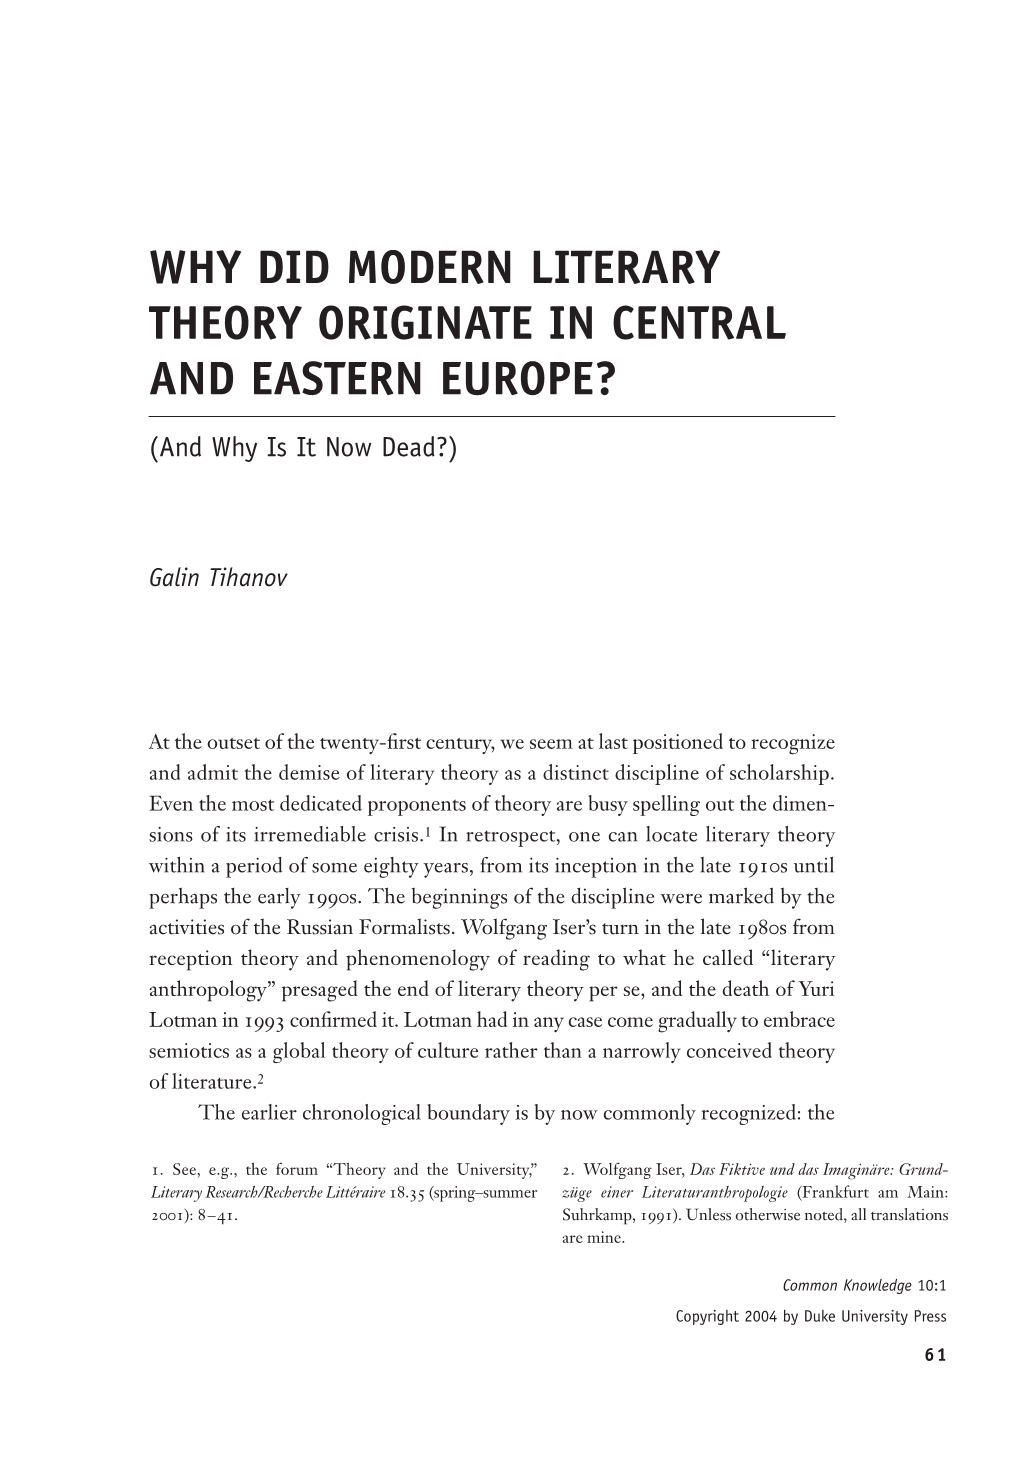 Why Did Modern Literary Theory Originate in Central and Eastern Europe?